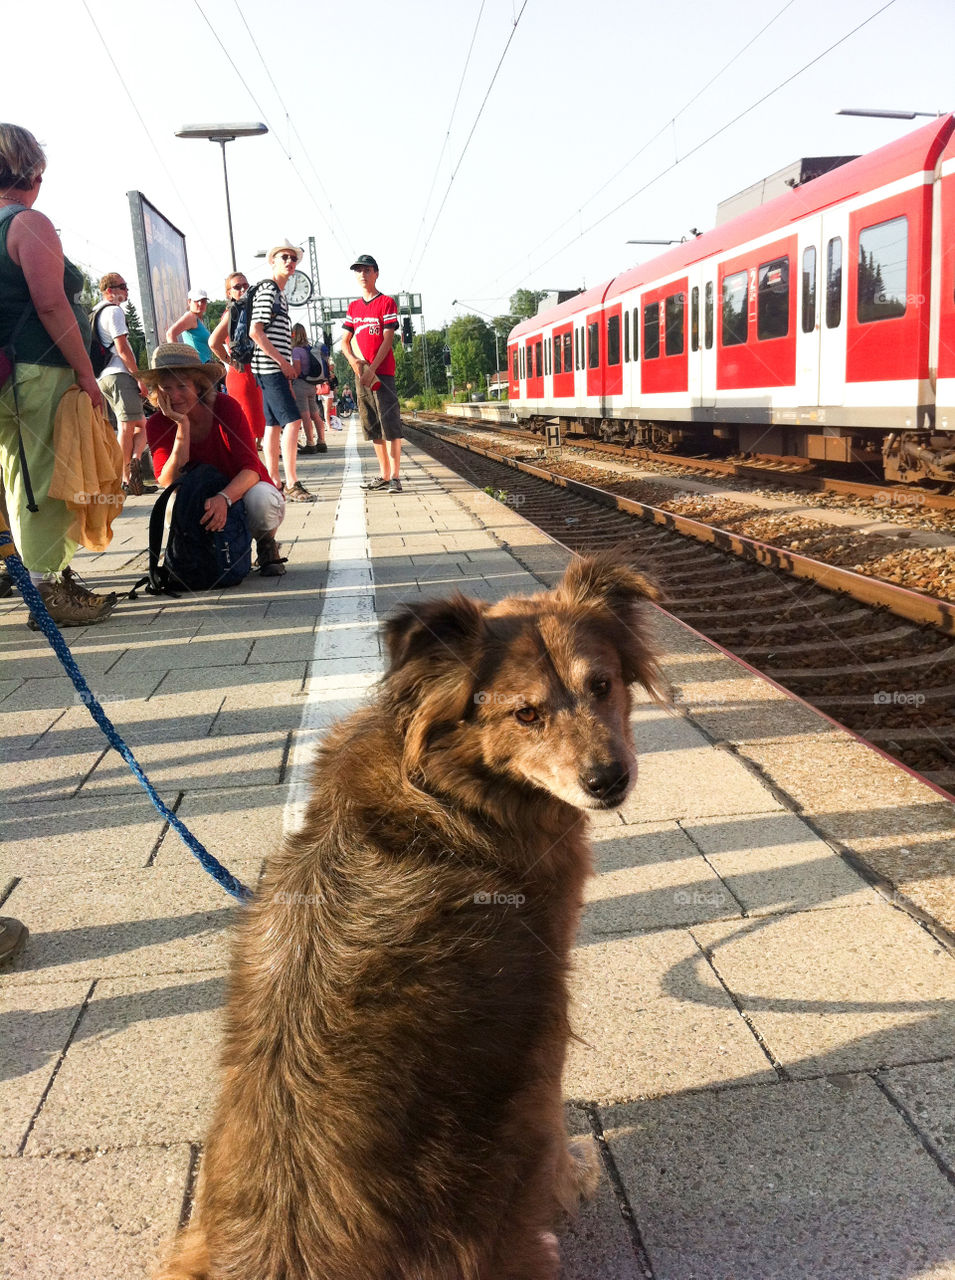 Waiting on the train . Germany 